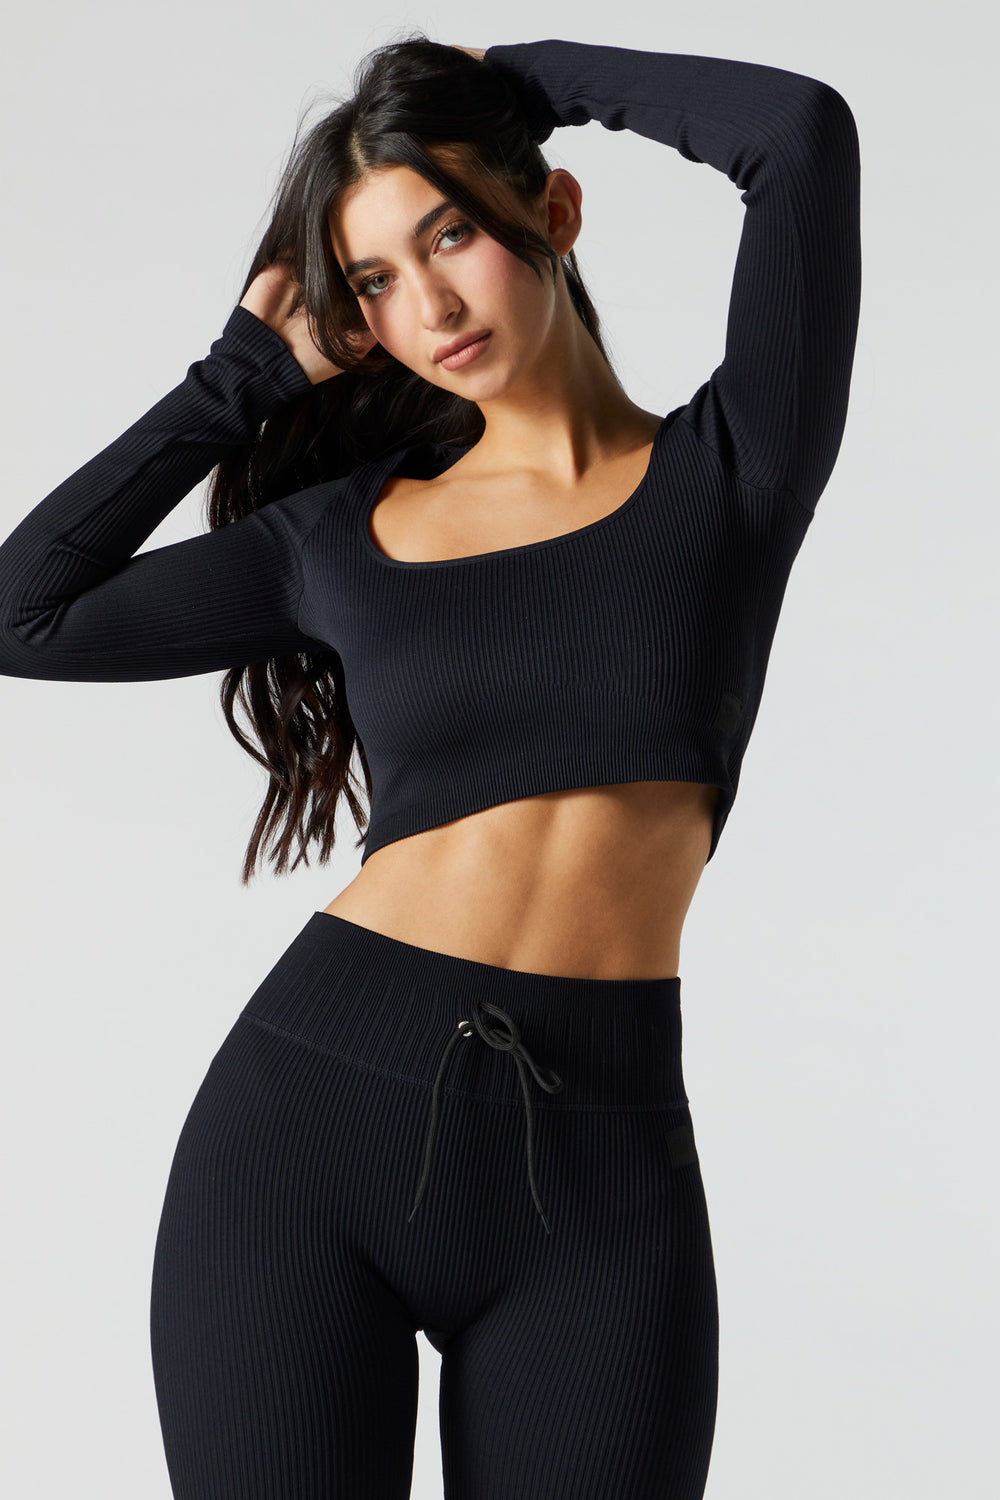 Sommer Ray Active Seamless Long Sleeve Top Sommer Ray Active Seamless Long Sleeve Top 5